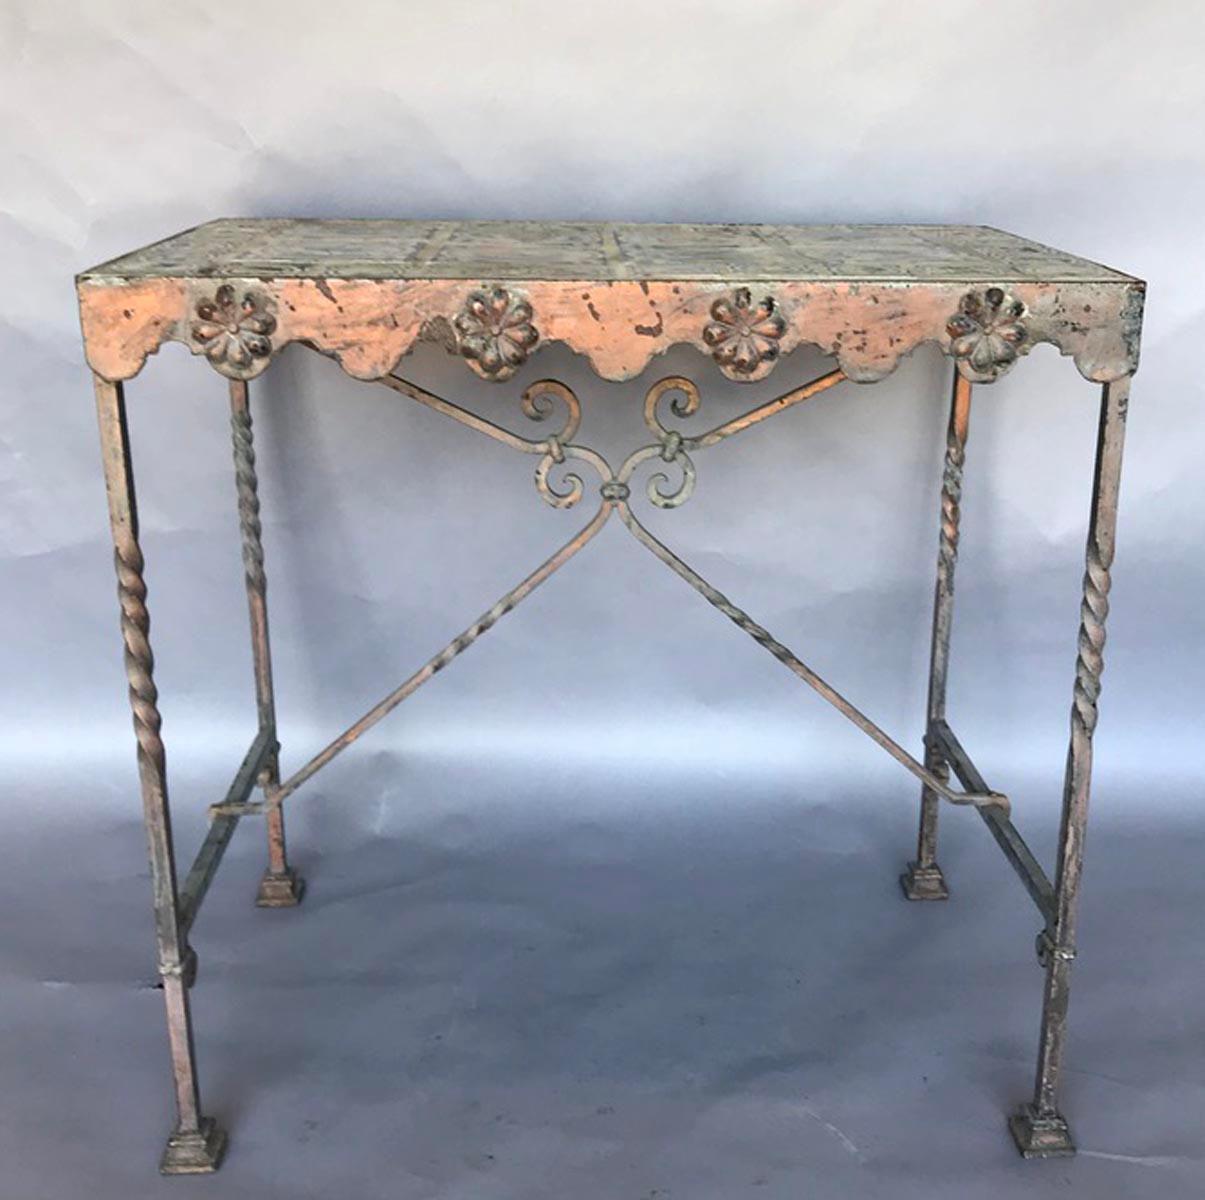 Country Iron Garden Table with Glazed Tile Top